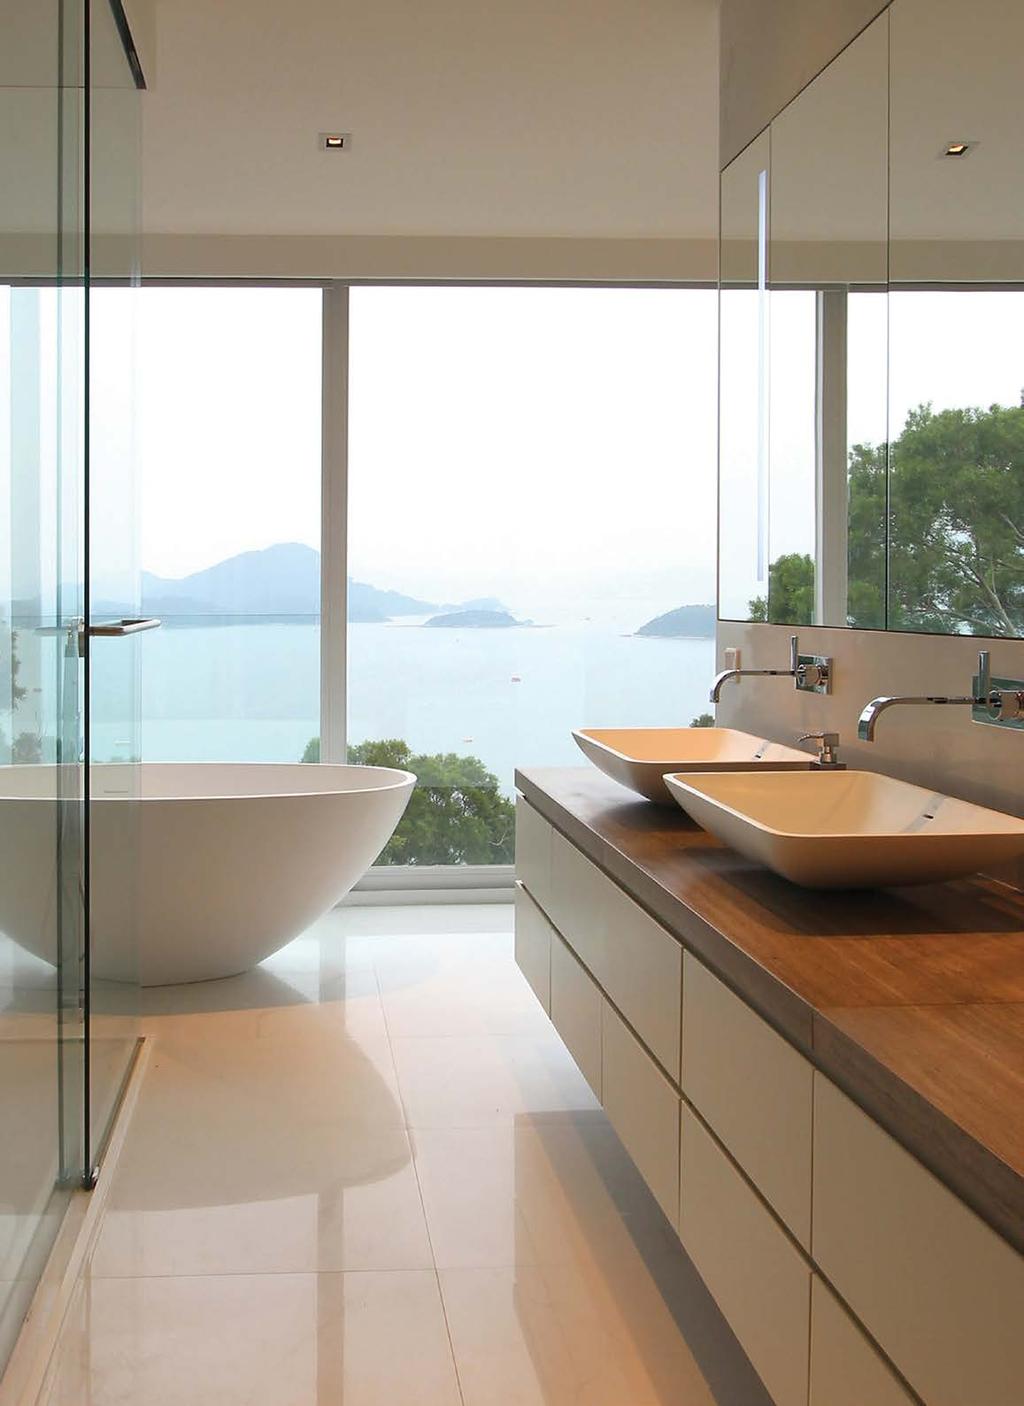 select projects Blu Bathworks has collaborated with notable architects, designers & contractors to create modern bathroom experiences in high-end resorts & private residences globally.